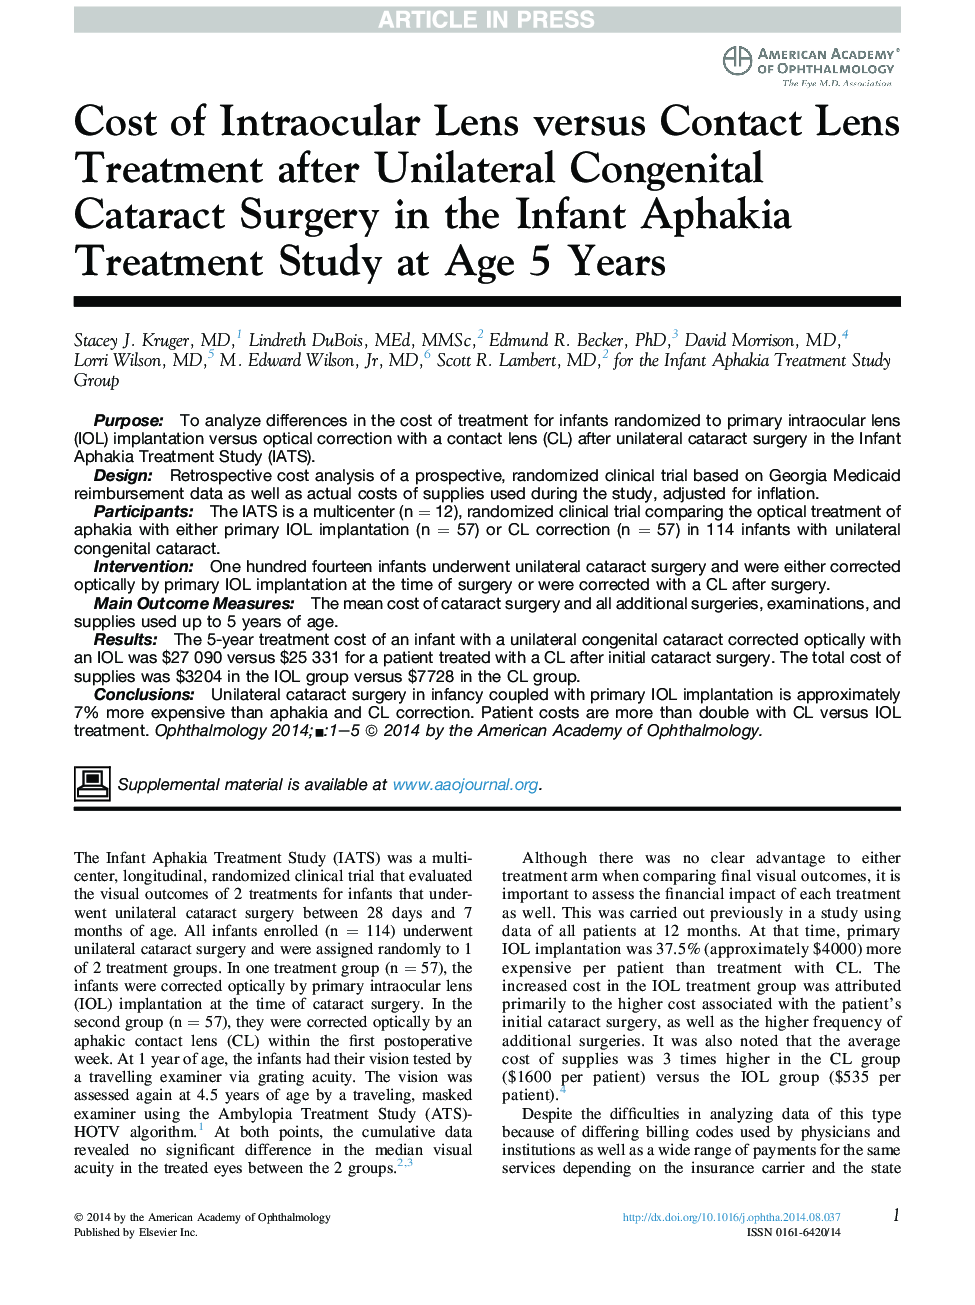 Cost of Intraocular Lens versus Contact Lens Treatment after Unilateral Congenital Cataract Surgery in the Infant Aphakia Treatment Study at Age 5 Years